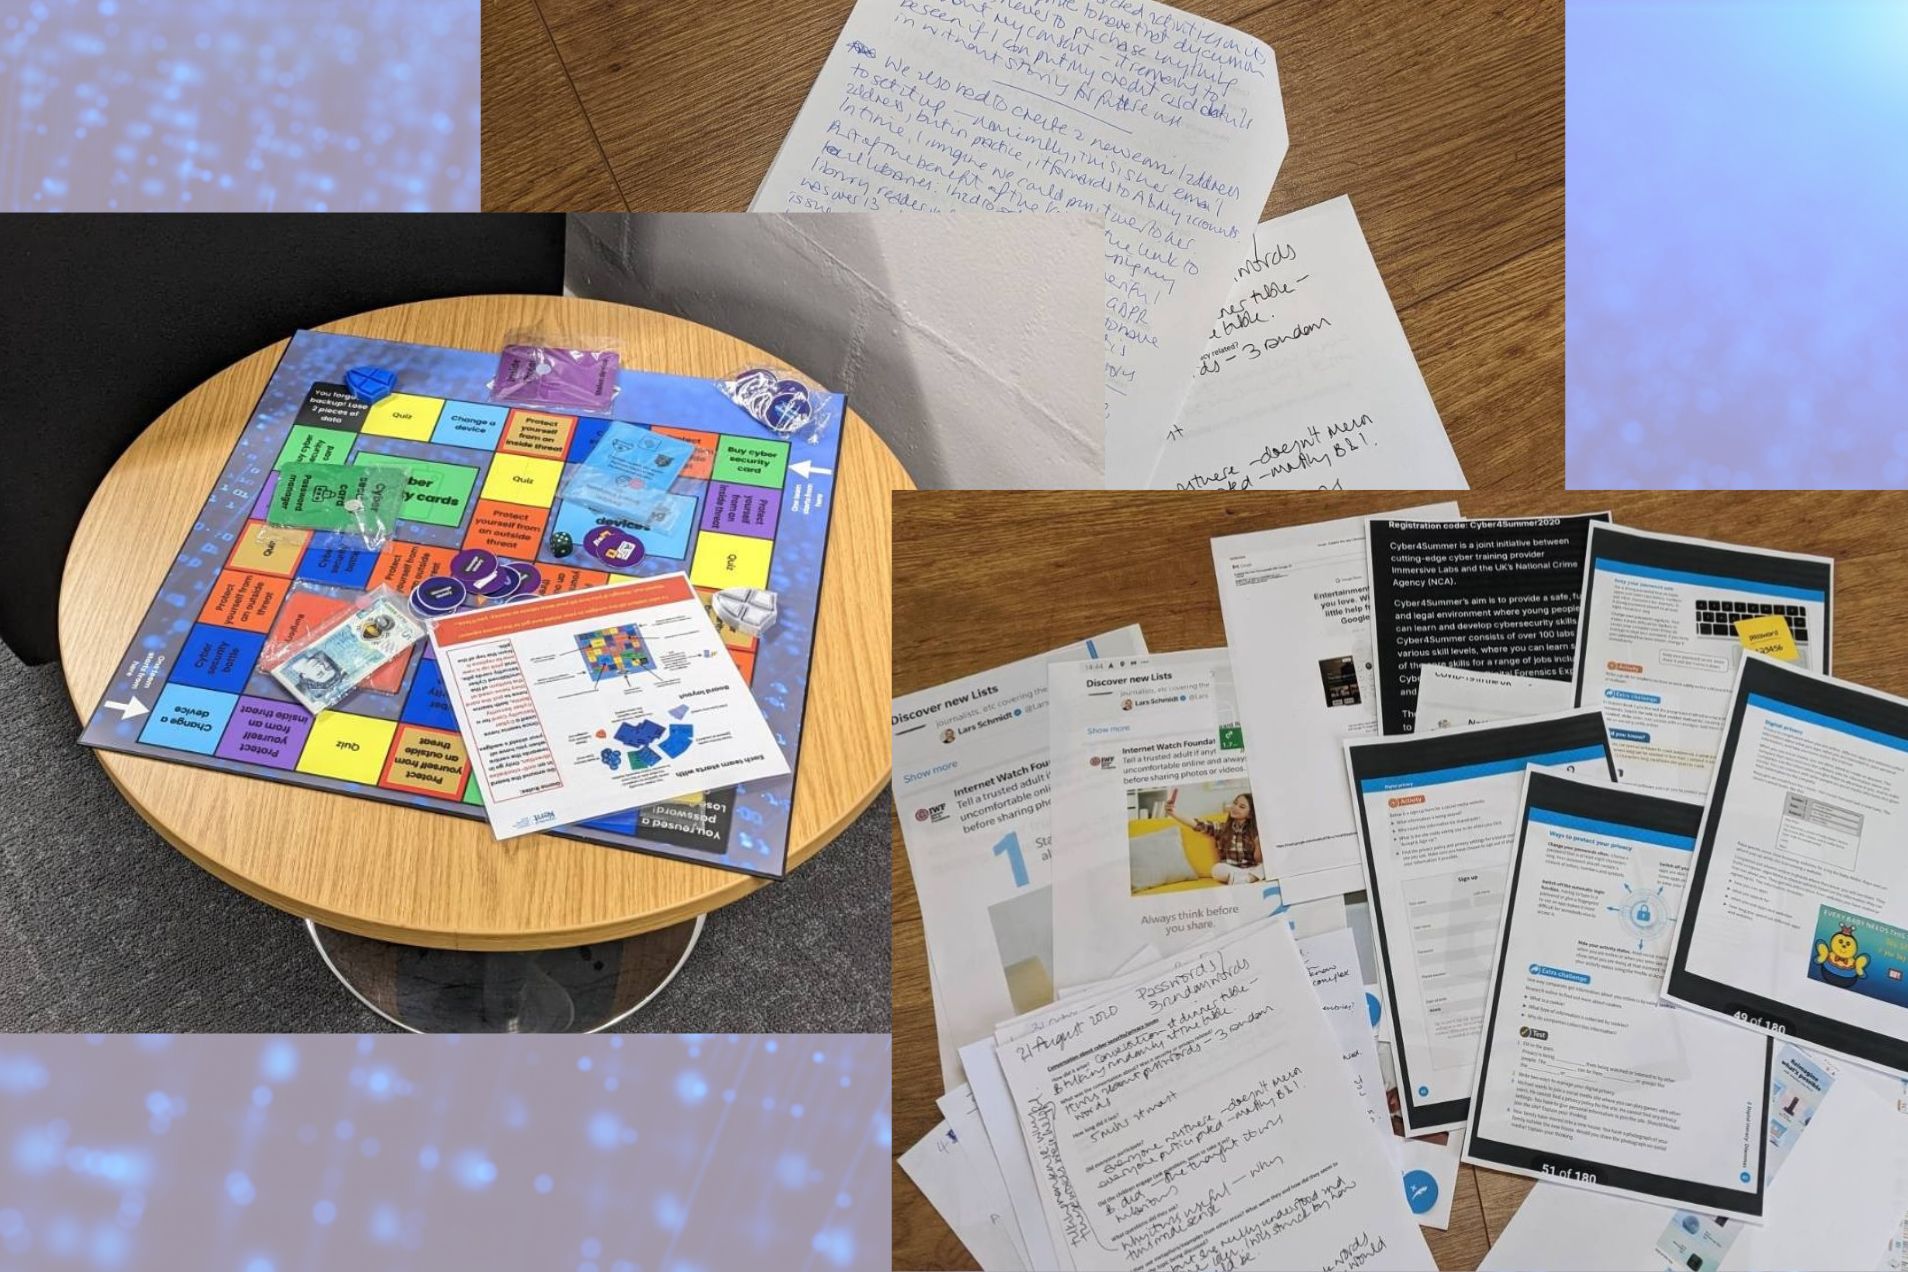 Sarah Turner's boardgame on cyber security education for families